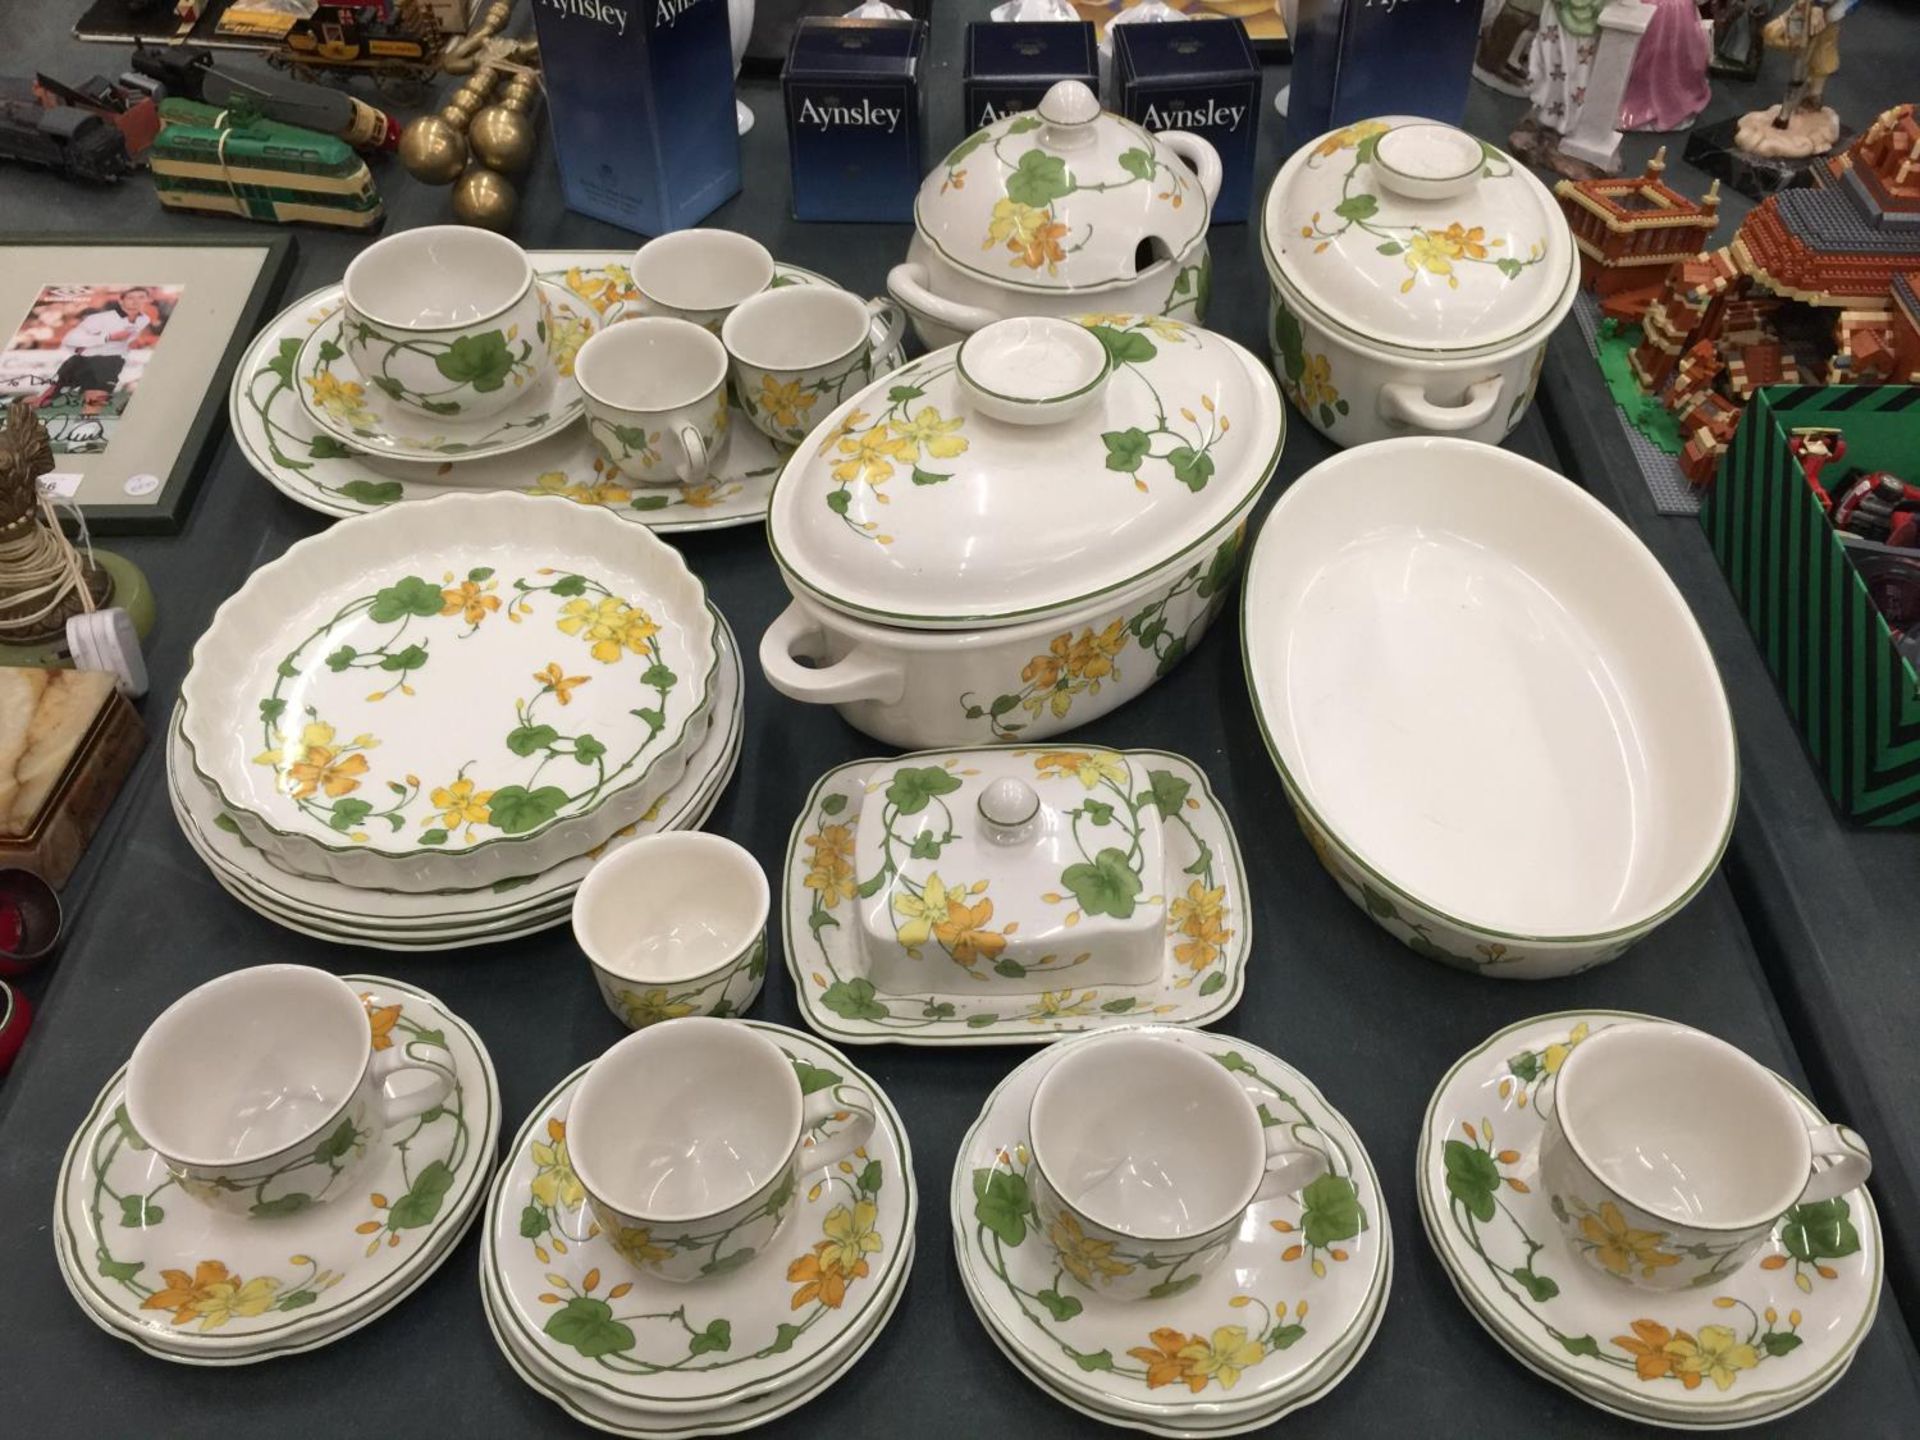 A LARGE QUANTITY OF VILLEROY AND BOCH 'GERANIUM' DINNERWARE TO INCLUDE PLATES, CUPS, SAUCERS, - Image 2 of 8